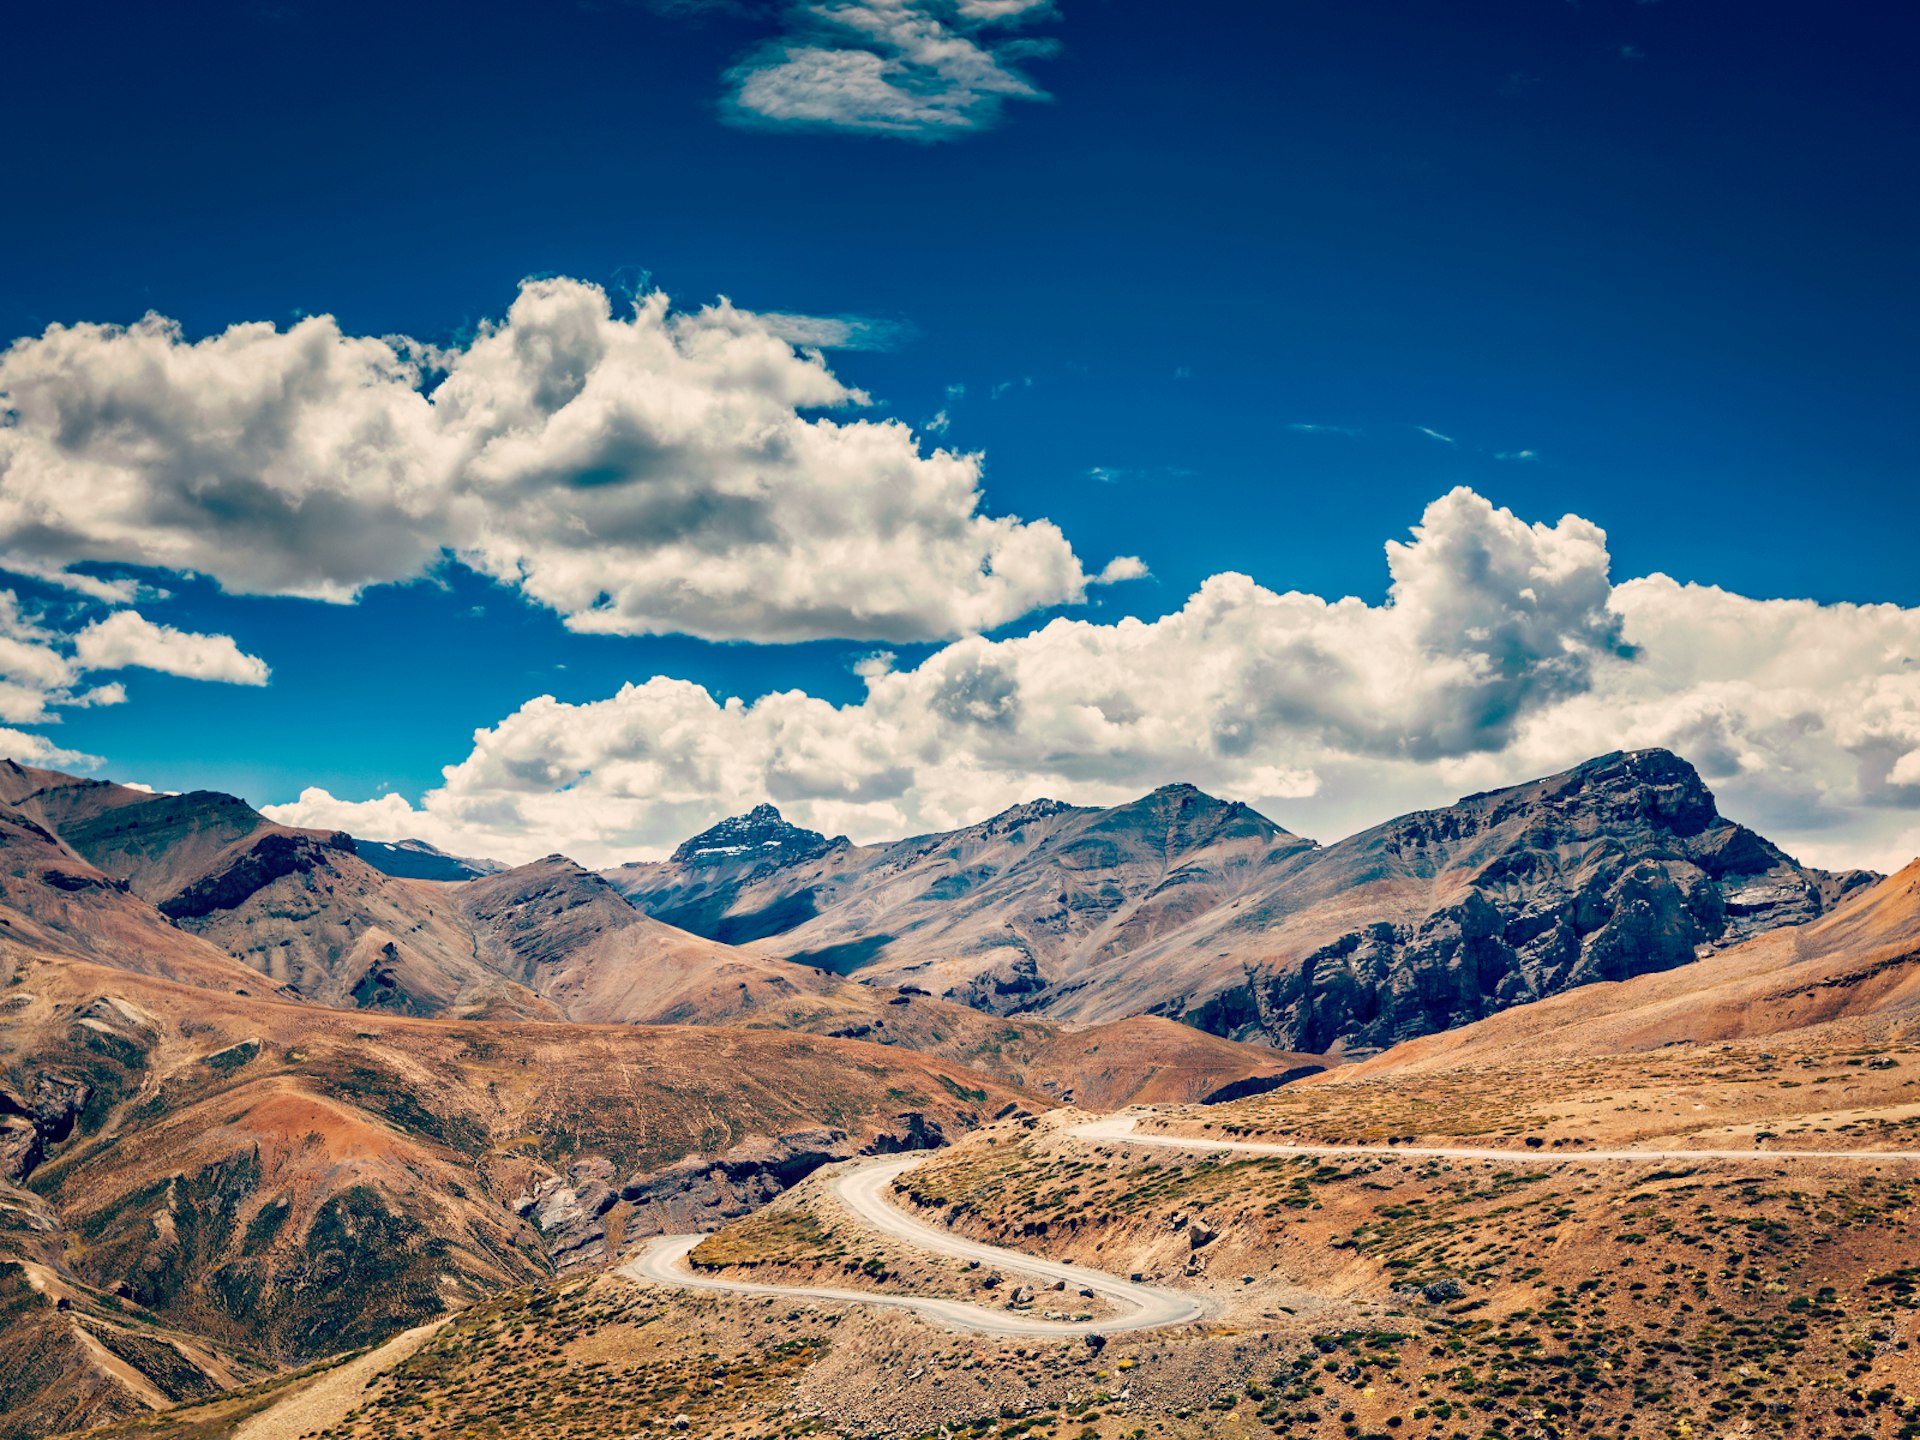 The Manali-Leh Highway winding through the Indian Himalayas © DR Travel Photo and Video / Shutterstock